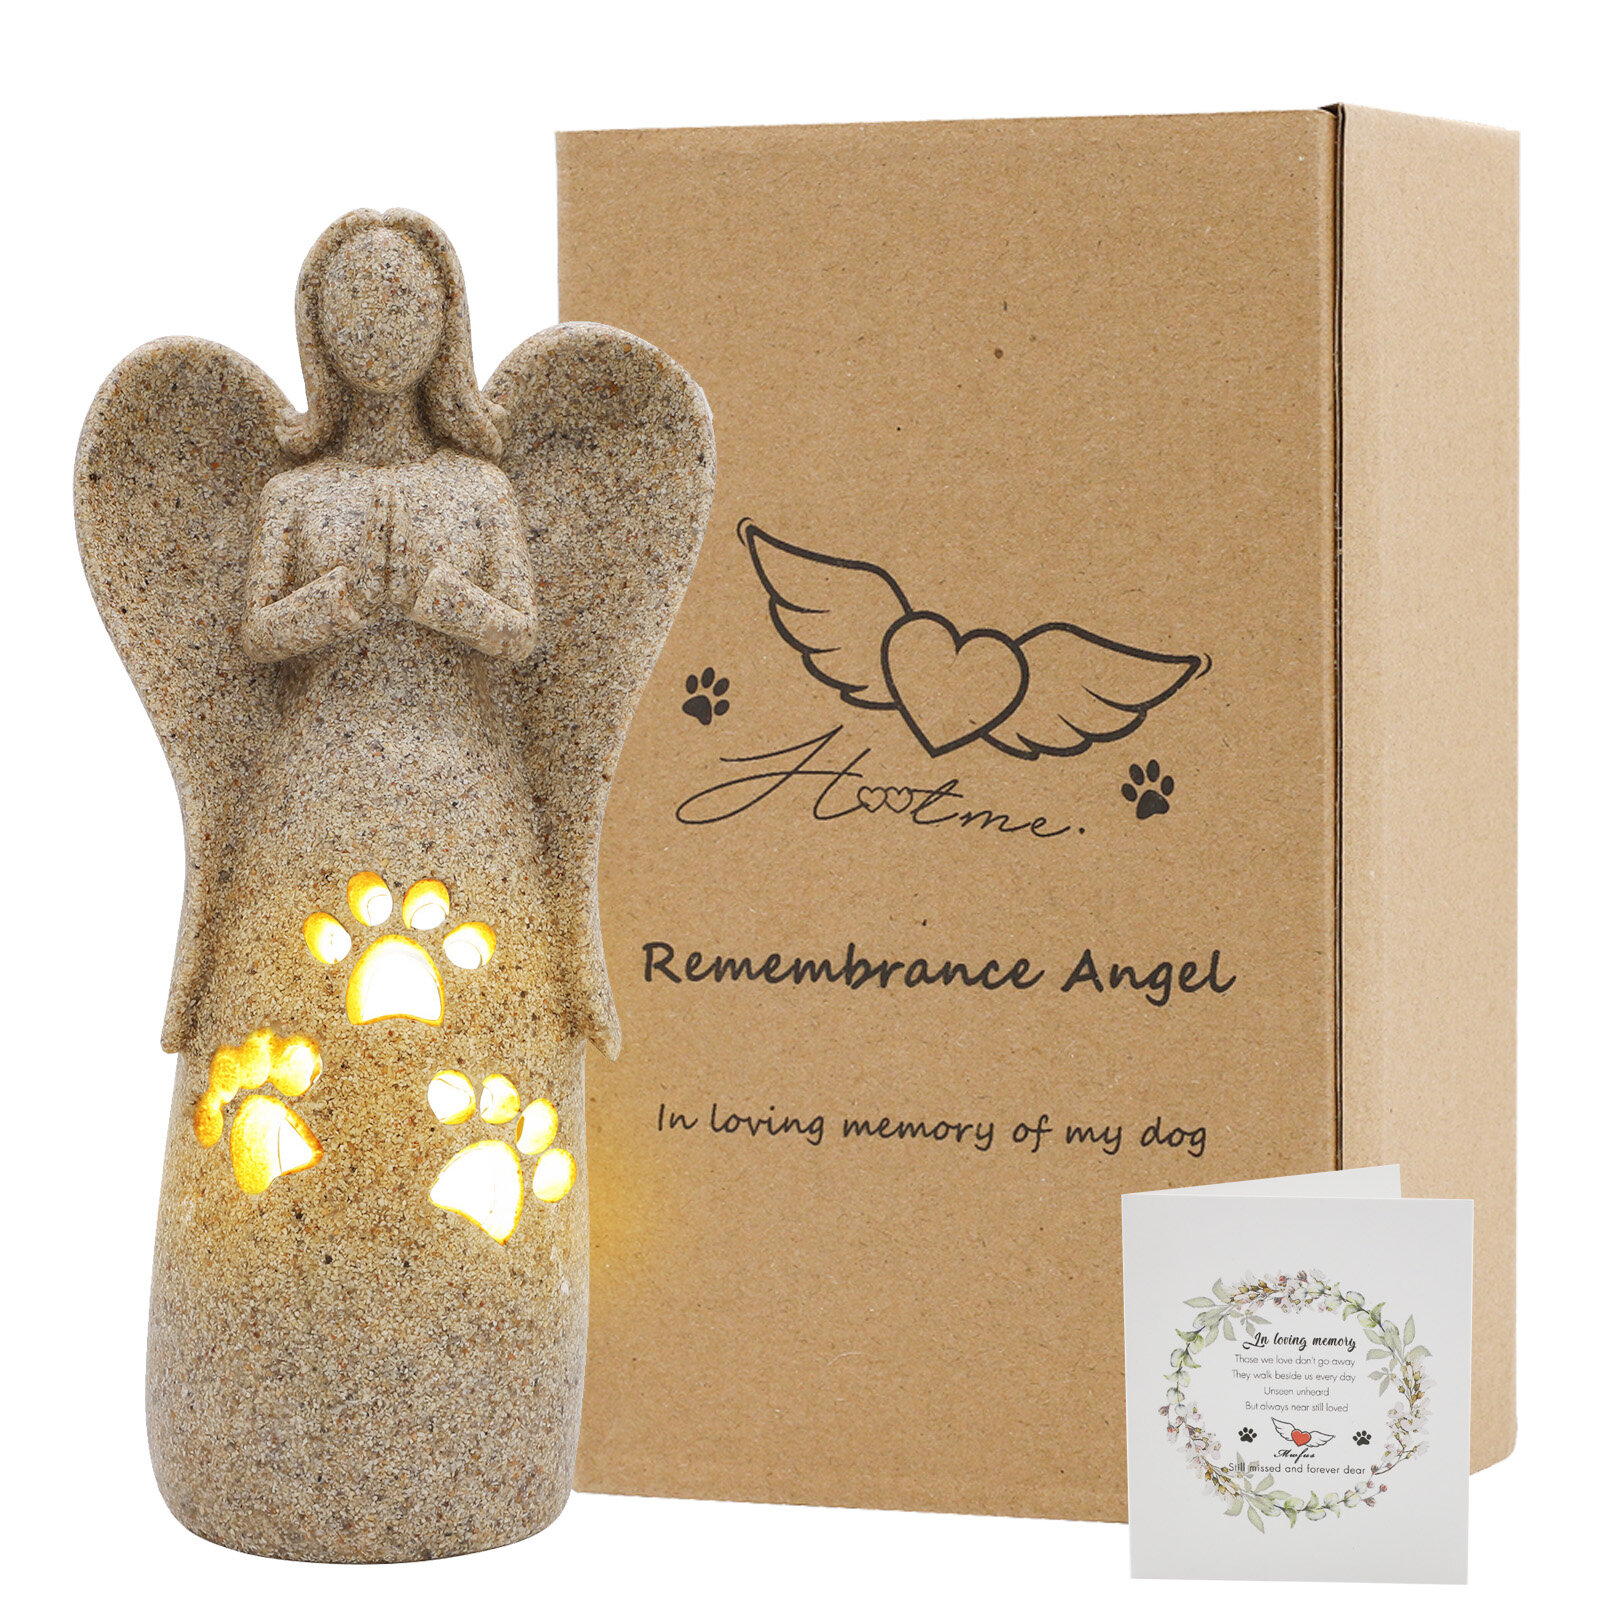 YINEOR Dog Memorial Gifts Angel Figurines Pet Sympathy Gifts for Loss of Dog Remembrance Gift 